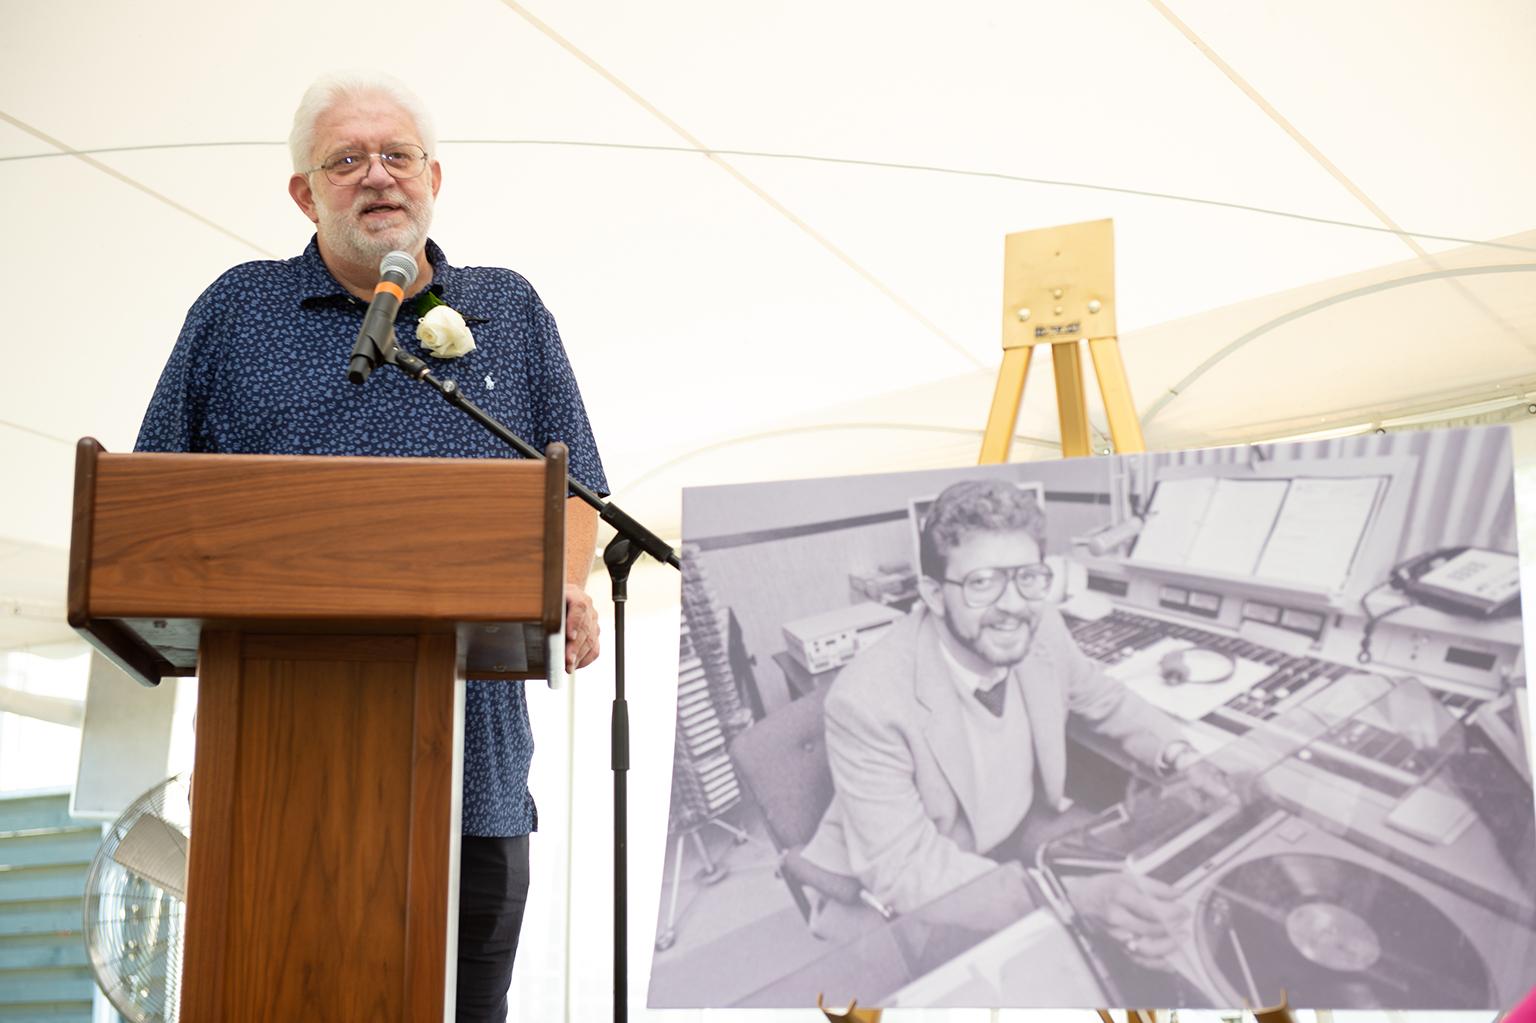 Honors for Carl Grapentine and his work at WFMT at a special “Goodbye to Carl” event at Ravinia Festival on July 14, 2018. (Courtesy 98.7 WFMT)